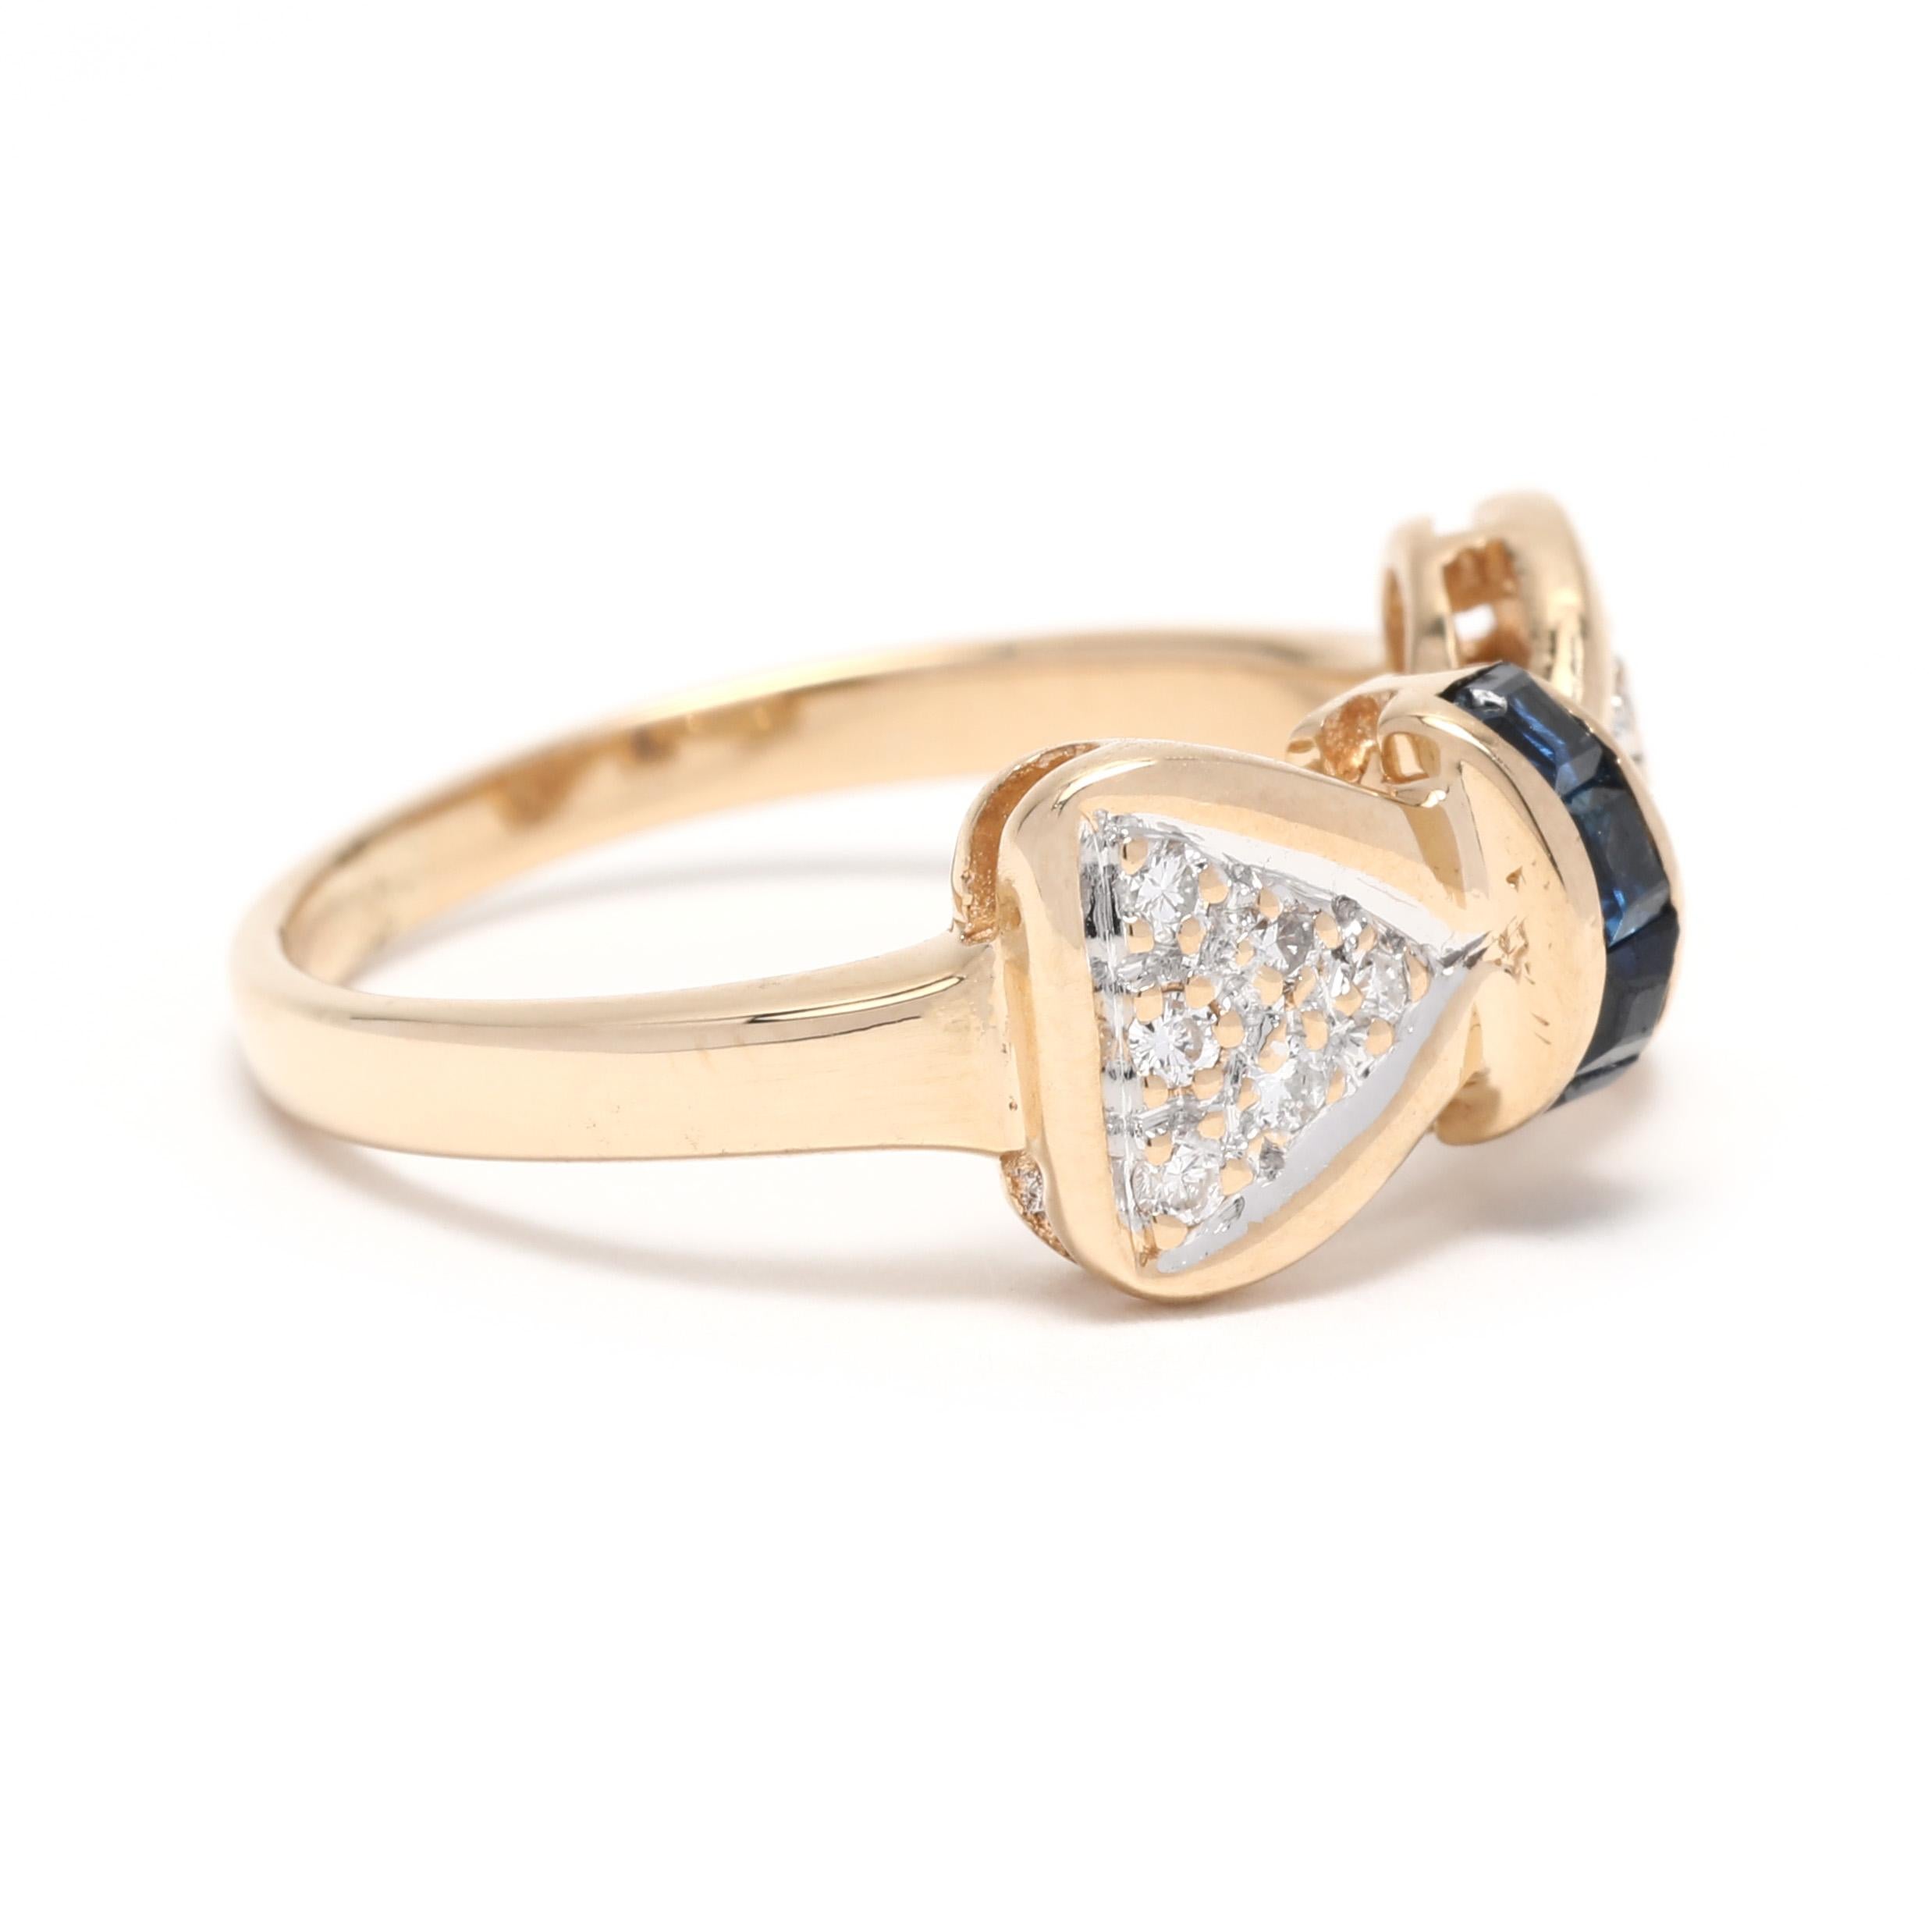 This stunning 0.36ctw diamond and sapphire bow ring is crafted in 14K yellow gold, with a ring size of 4.75. The center is adorned with a stunning natural sapphire surrounded by dazzling diamonds, creating a stunning and unique cocktail ring. This